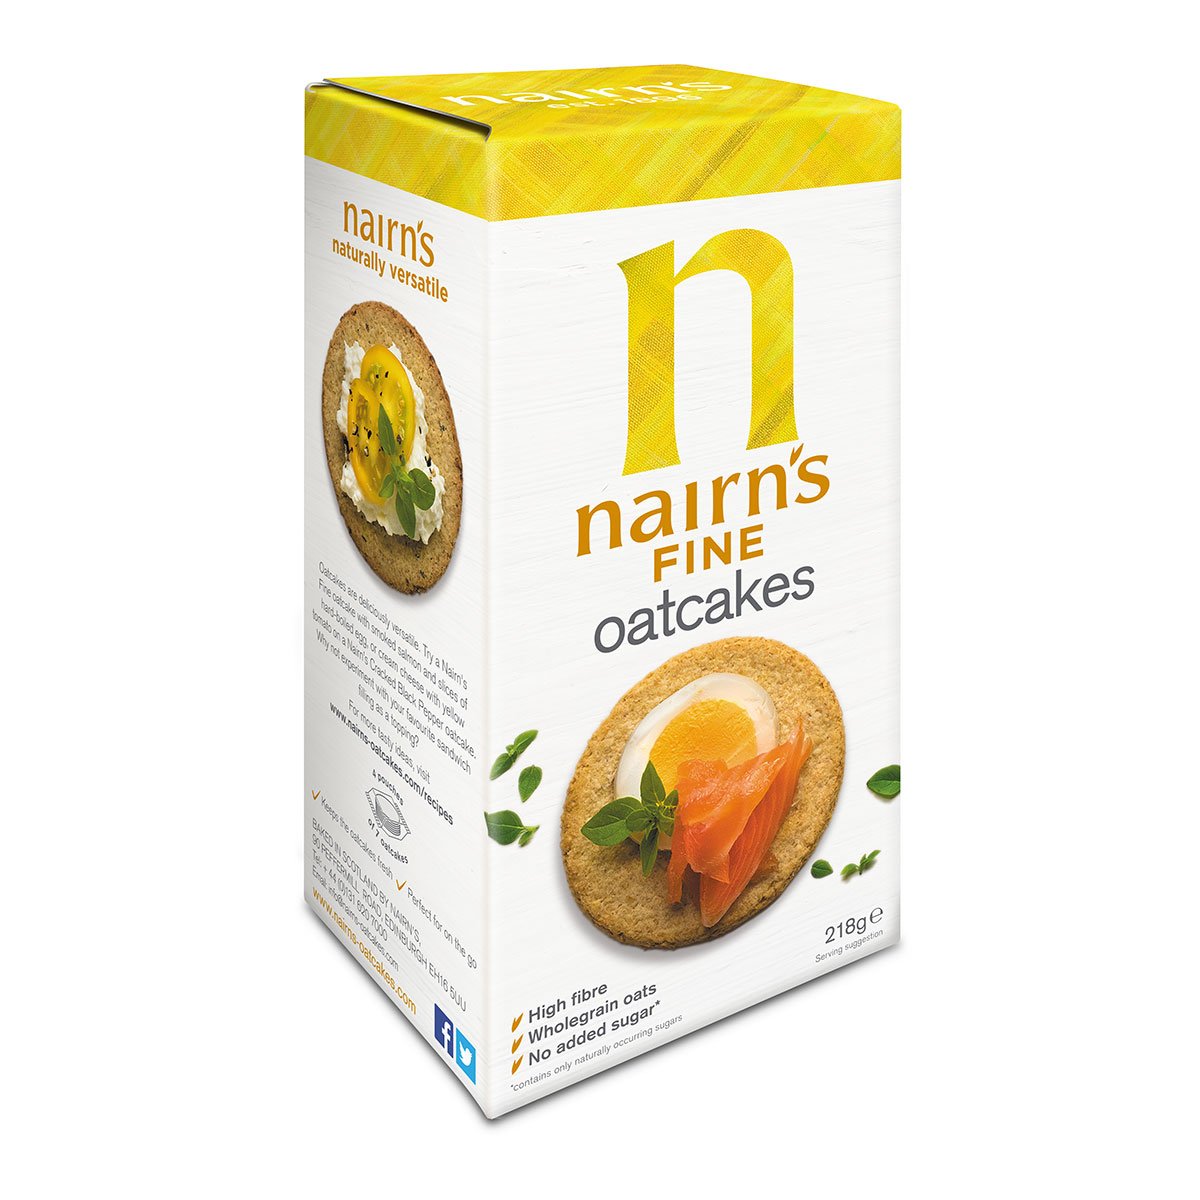 Nairns Fine Oatcakes, 218g - Just Natural